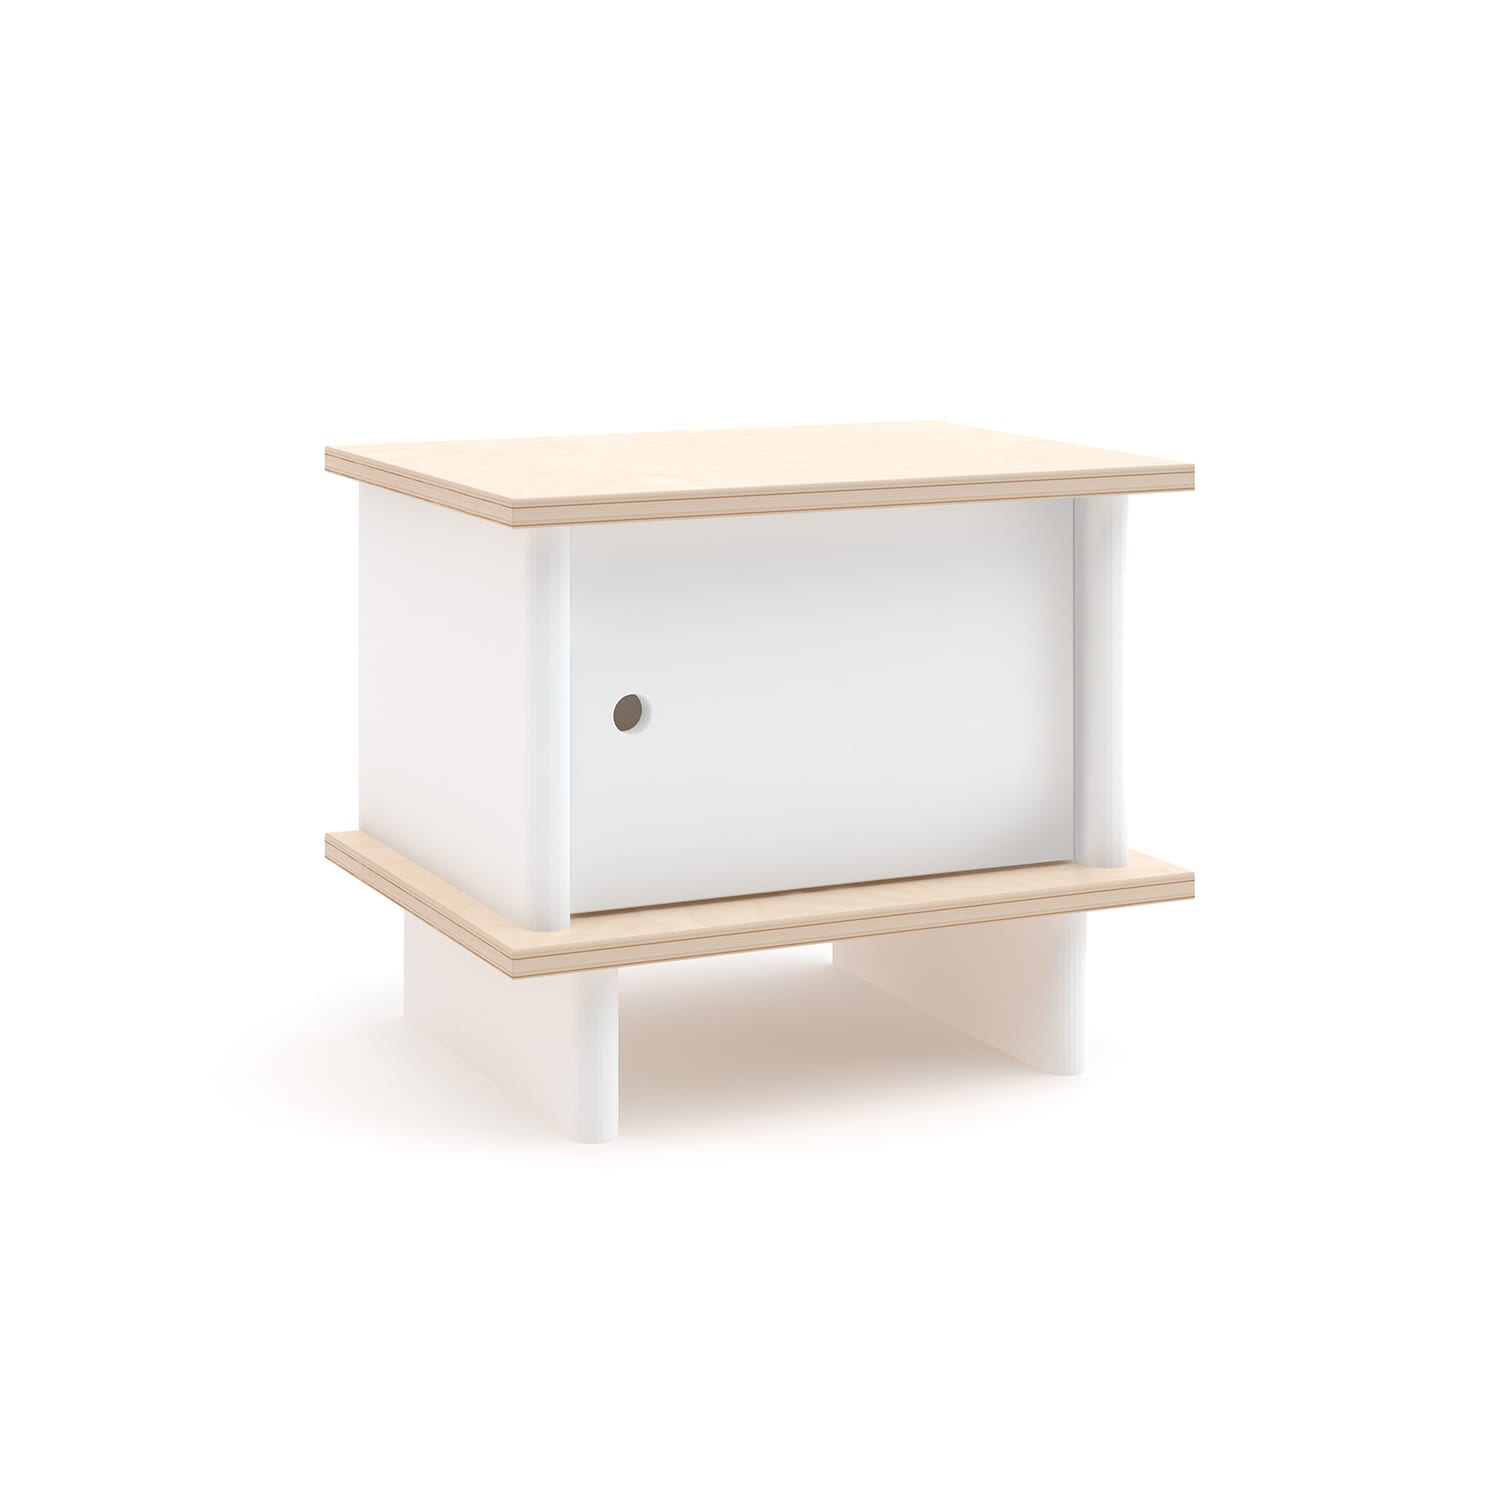 Merlin NightStand by Oeuf